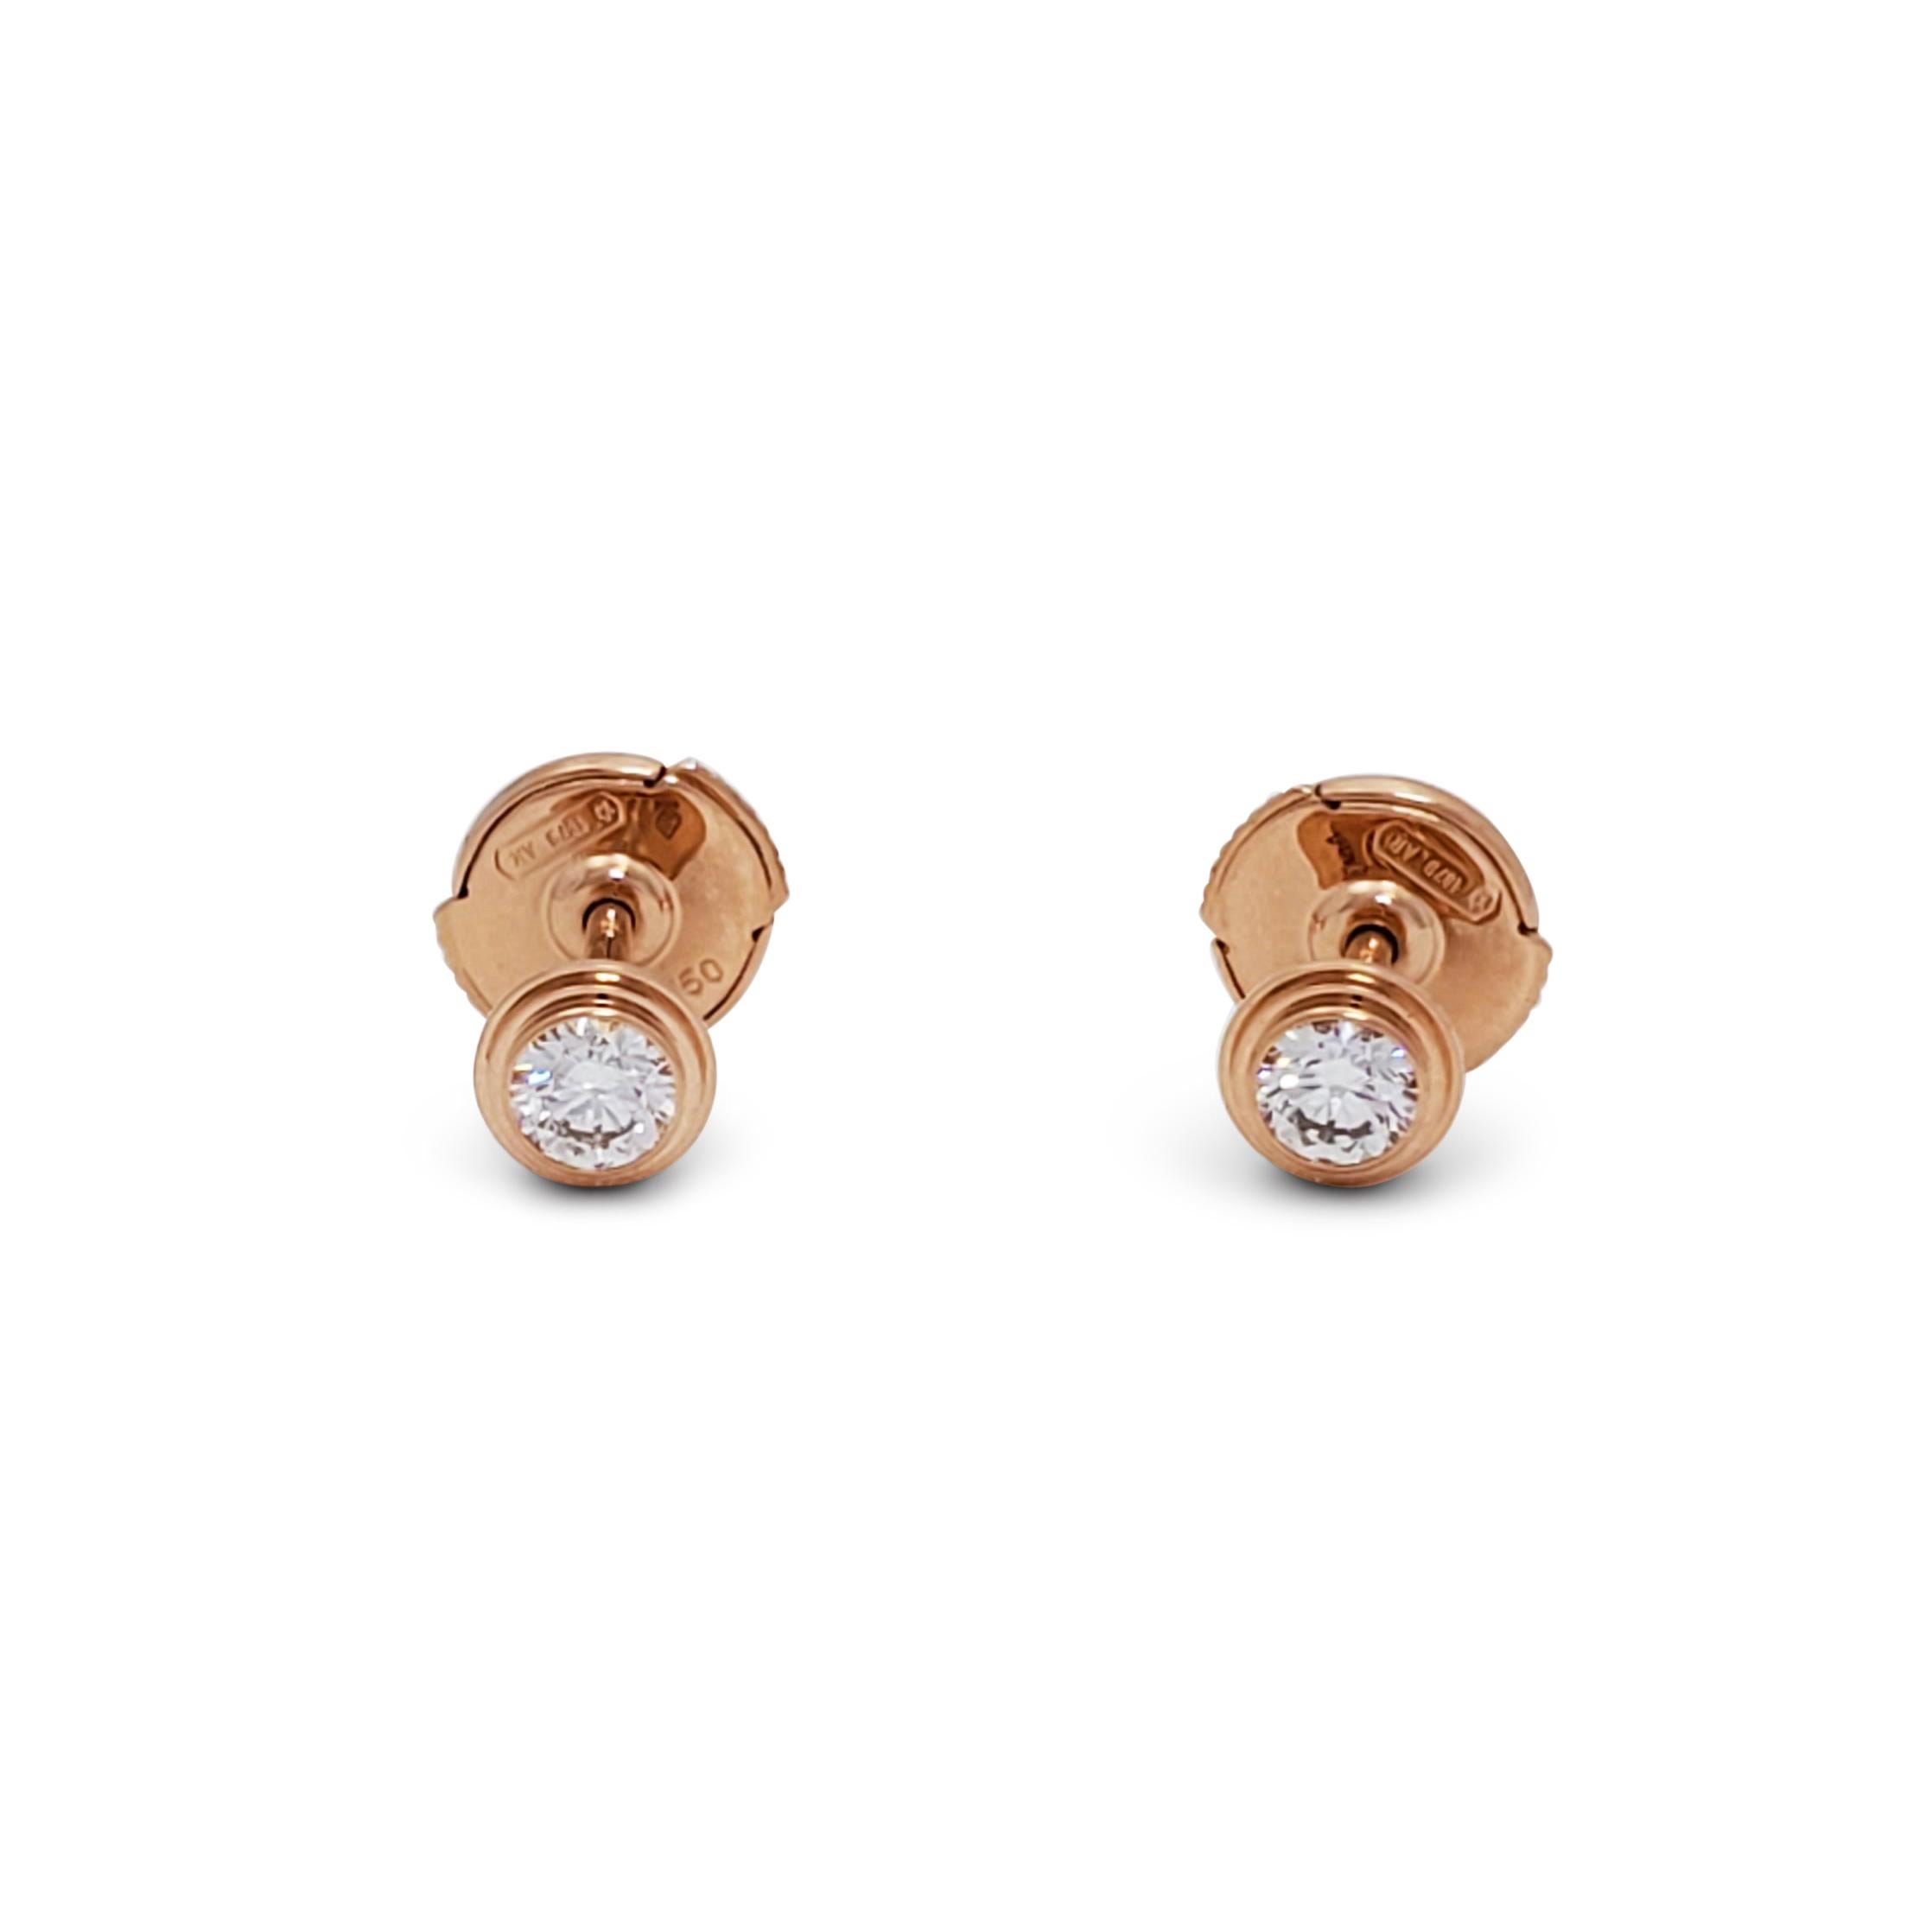 Authentic Cartier d'Amour earrings crafted in rose gold.  Each stud earring features a single round brilliant cut diamond at the center for an estimated 0.18 carats total weight.  Earrings measure 4.5mm in diameter with posts for pierced ears. 